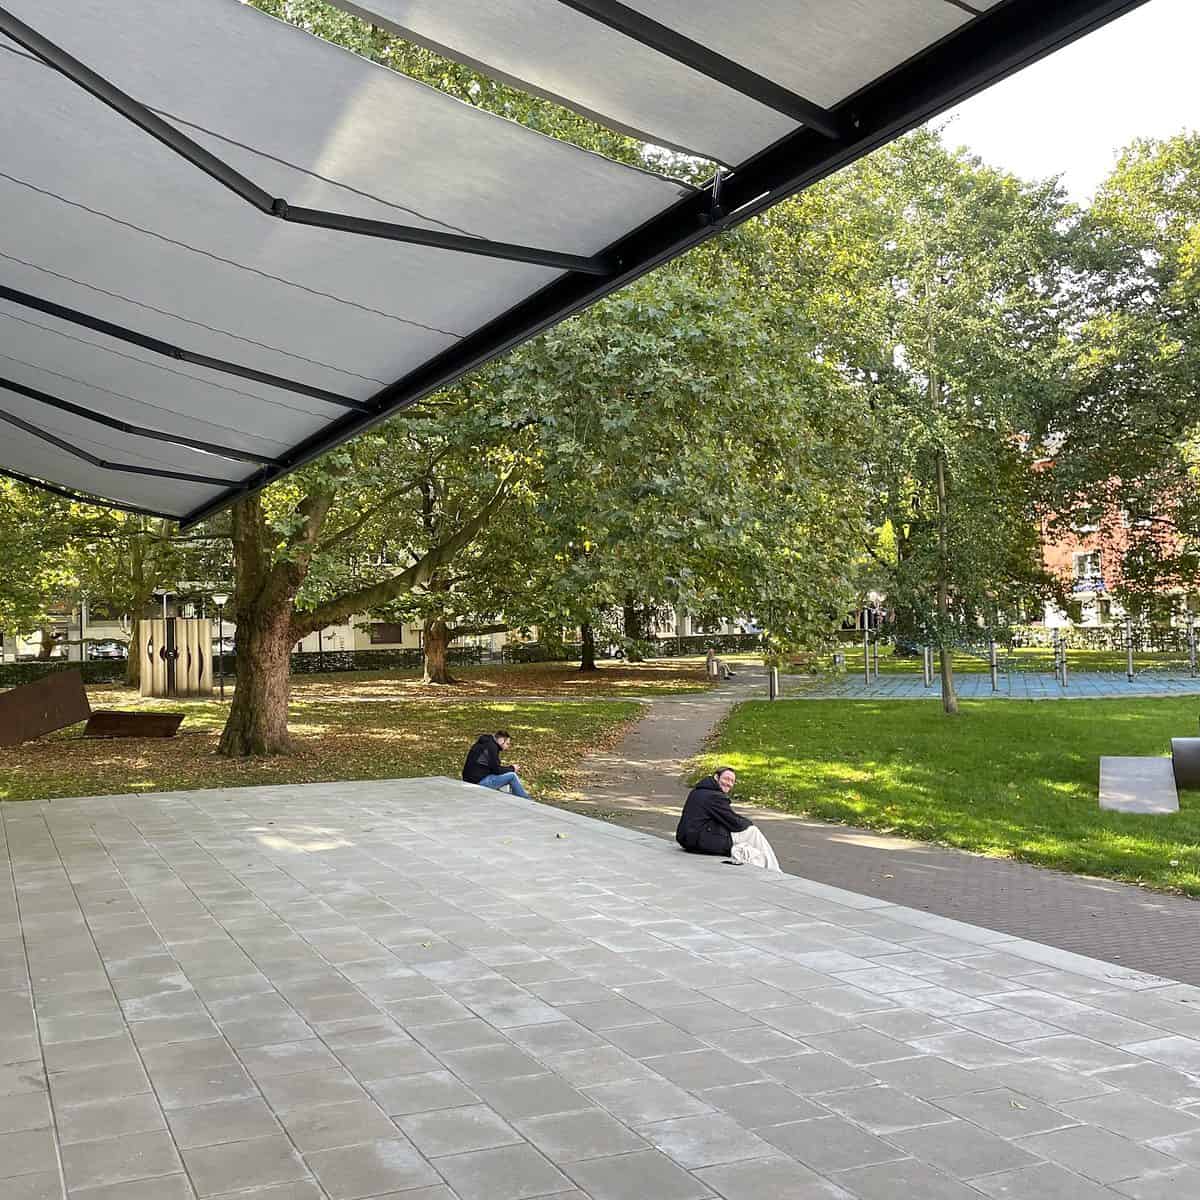 markilux 3300 full cassette awning covering a large outdoor area